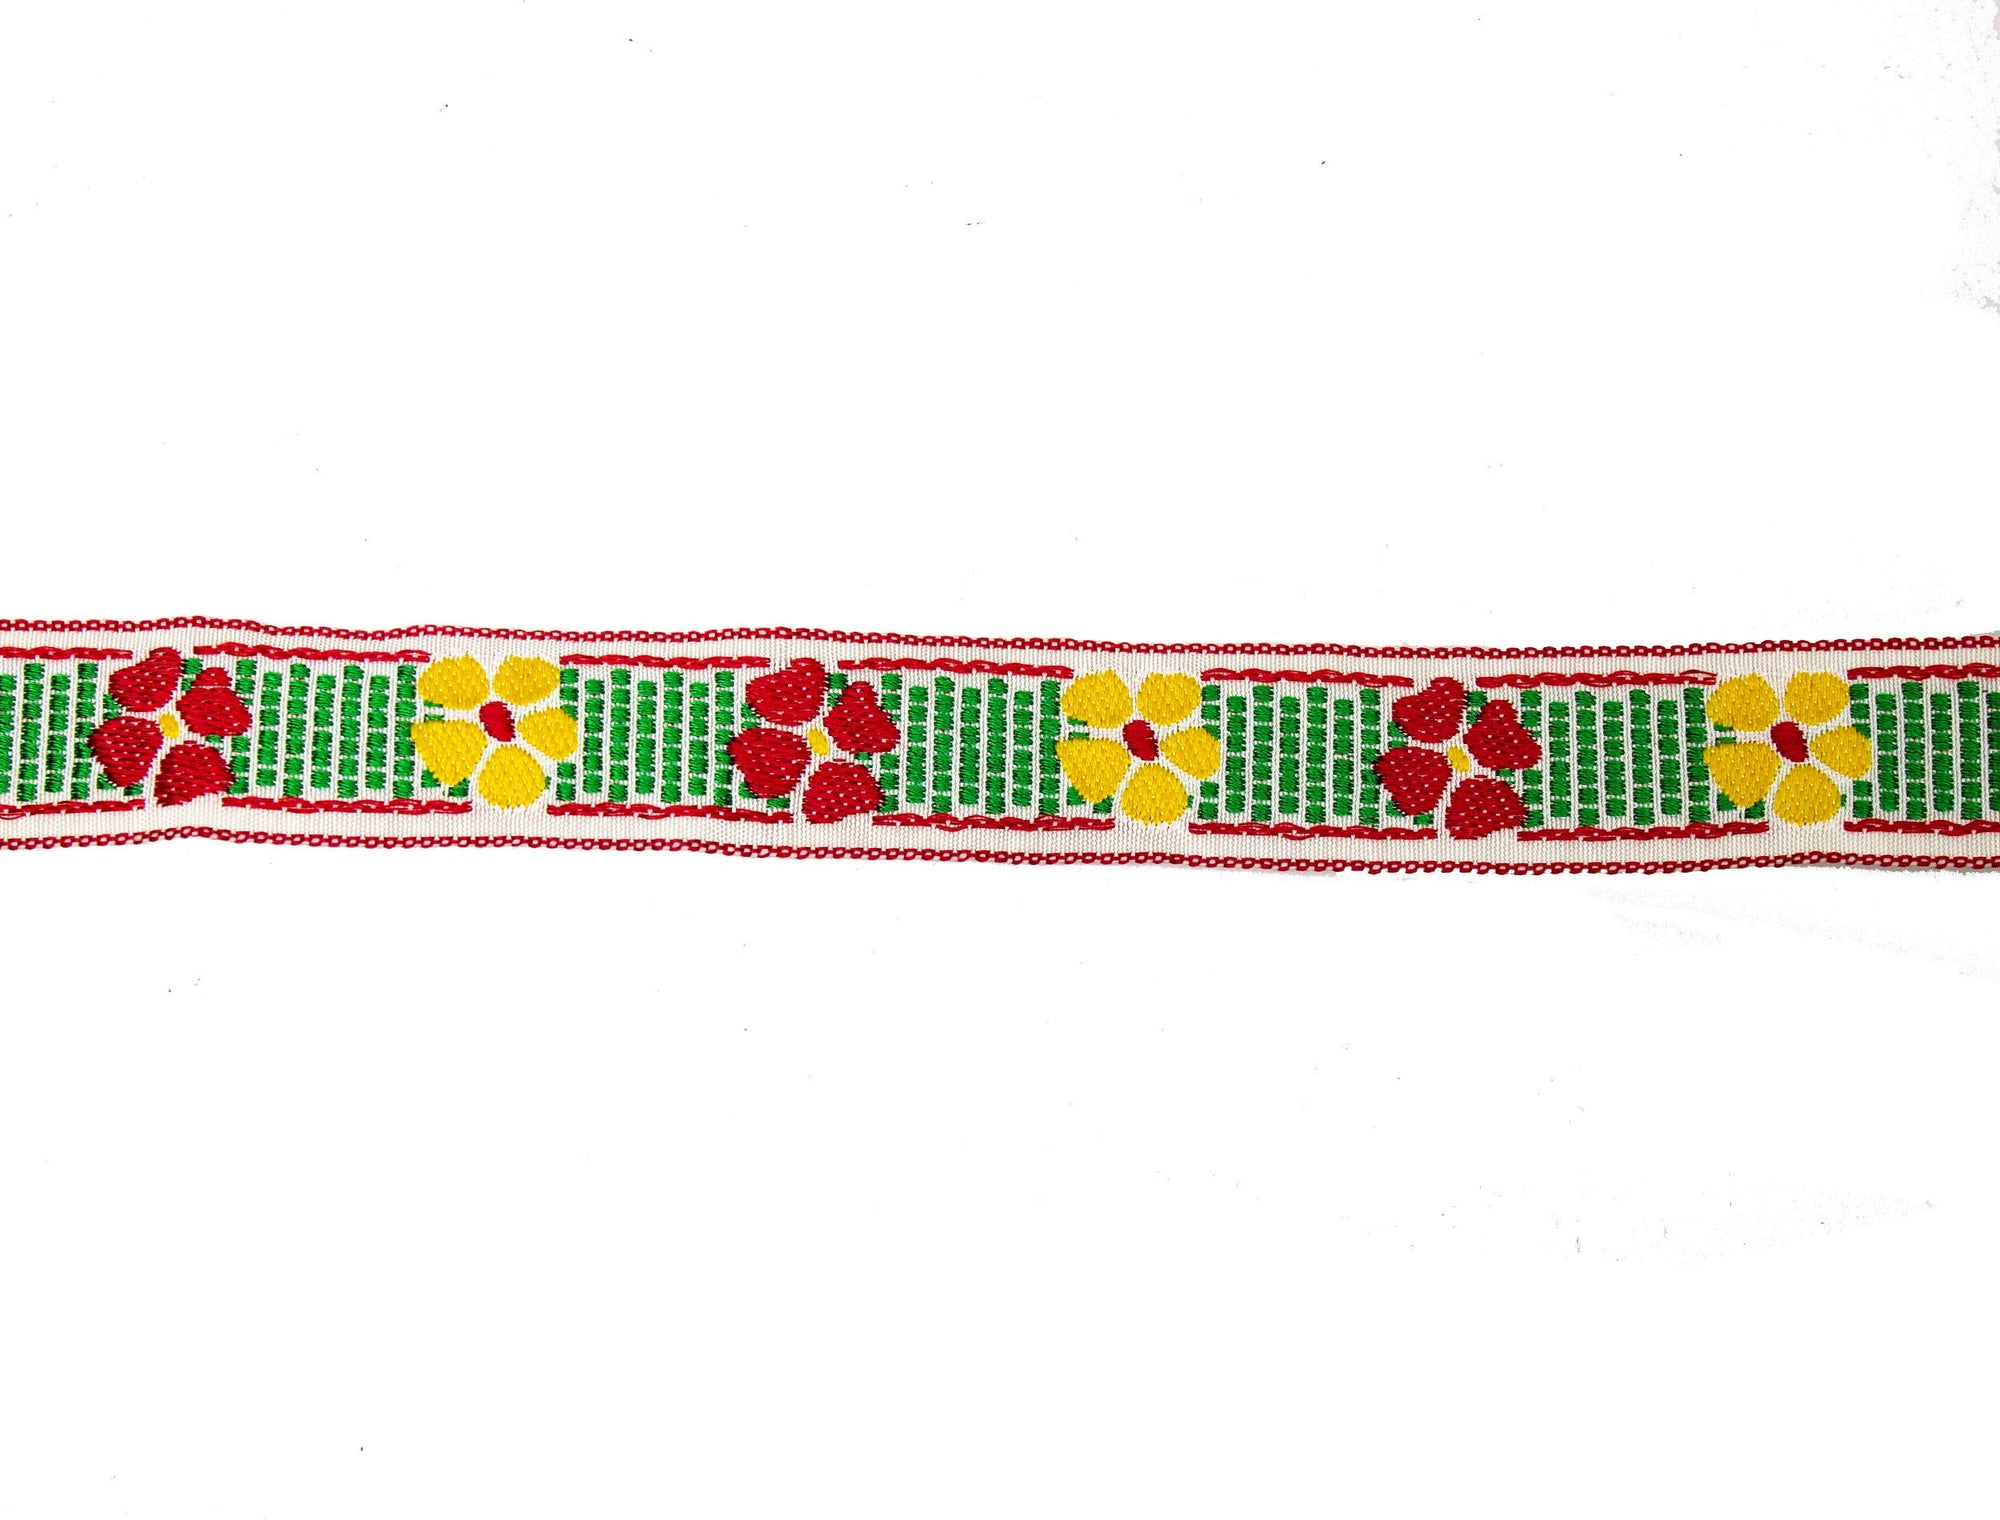 Vintage Ribbon Trim White with Red, Green, Yellow Flower Embroidery 3/4" Wide - One Piece 1.5 Yards - Humboldt Haberdashery